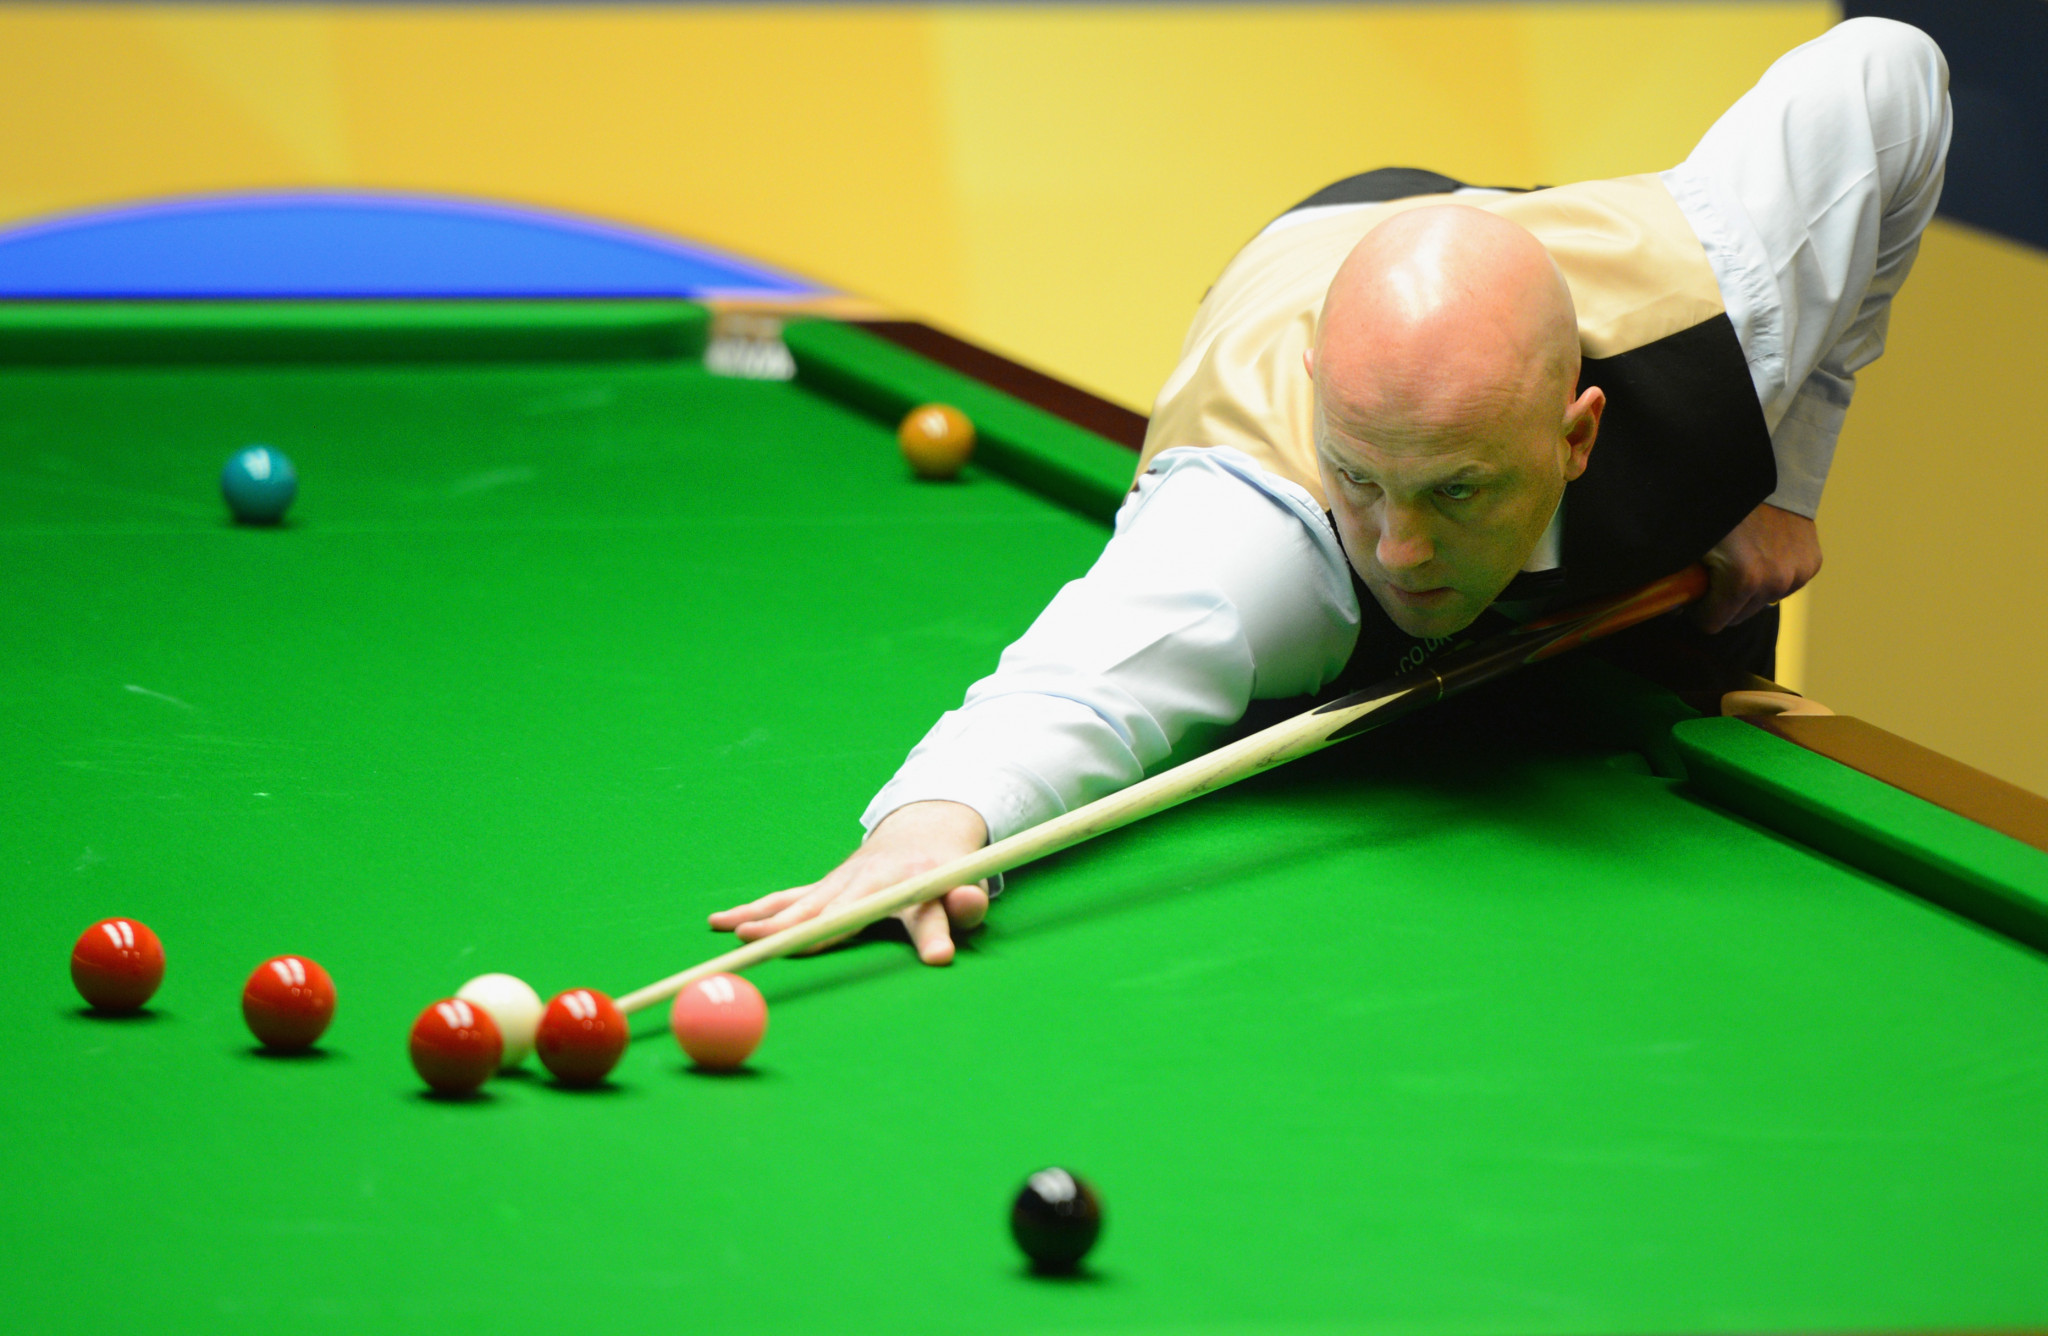 King suspended from World Snooker Tour pending betting probe